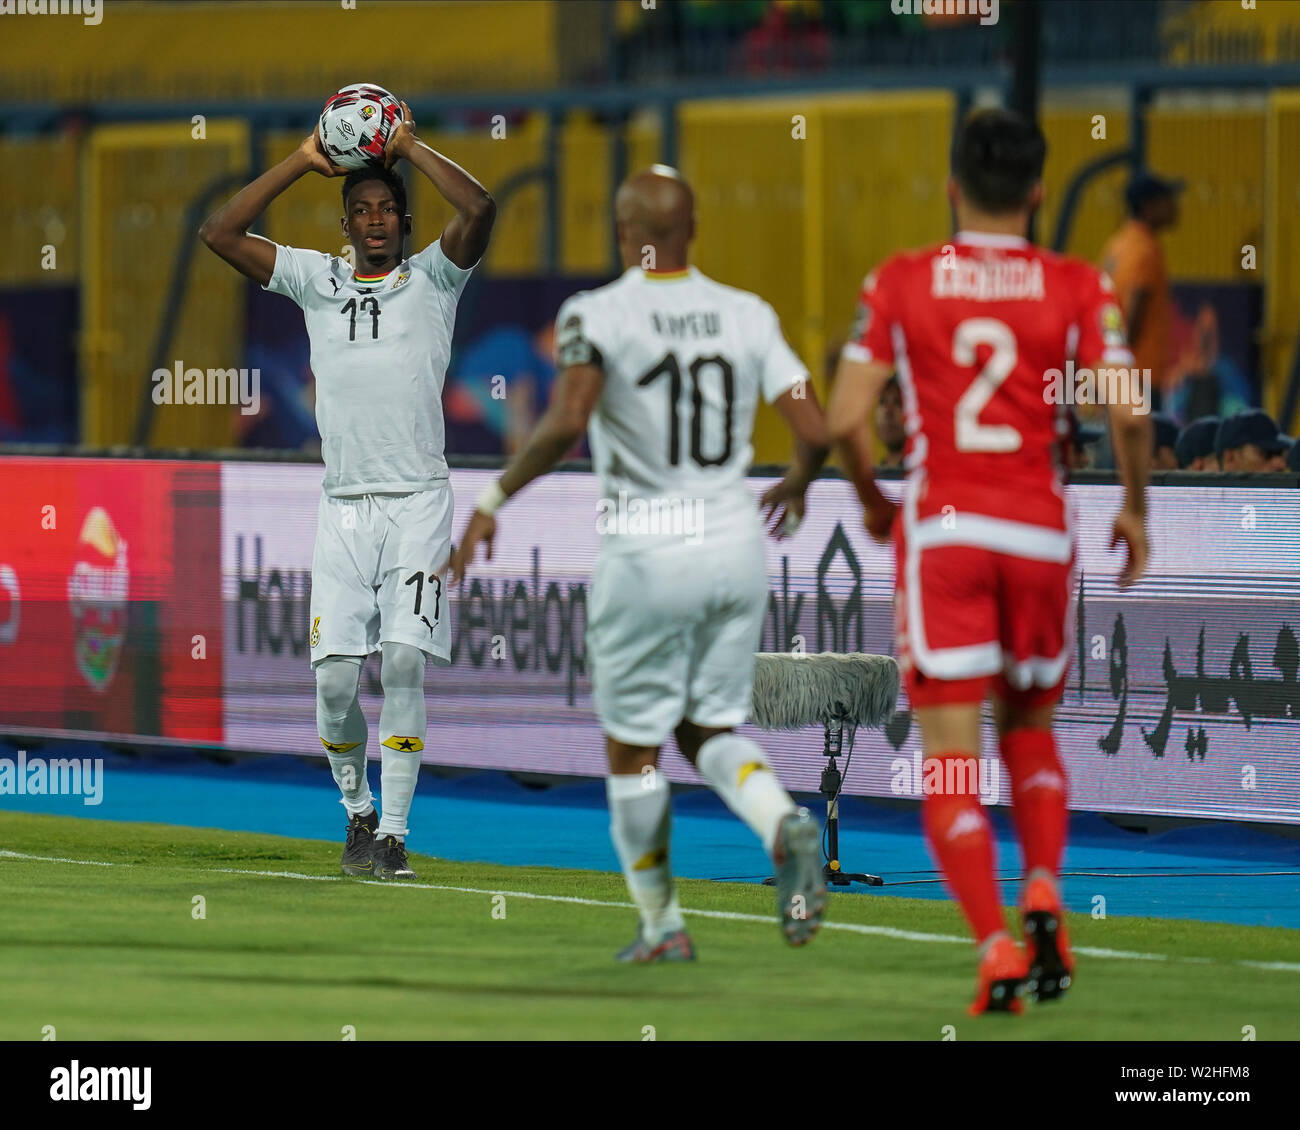 FRANCE OUT July 8, 2019: Wakaso Mubarak of Ghana during the 2019 African Cup of Nations match between Ghana and Tunisia at the Ismailia Stadium in Ismailia, Egypt. Ulrik Pedersen/CSM. Stock Photo